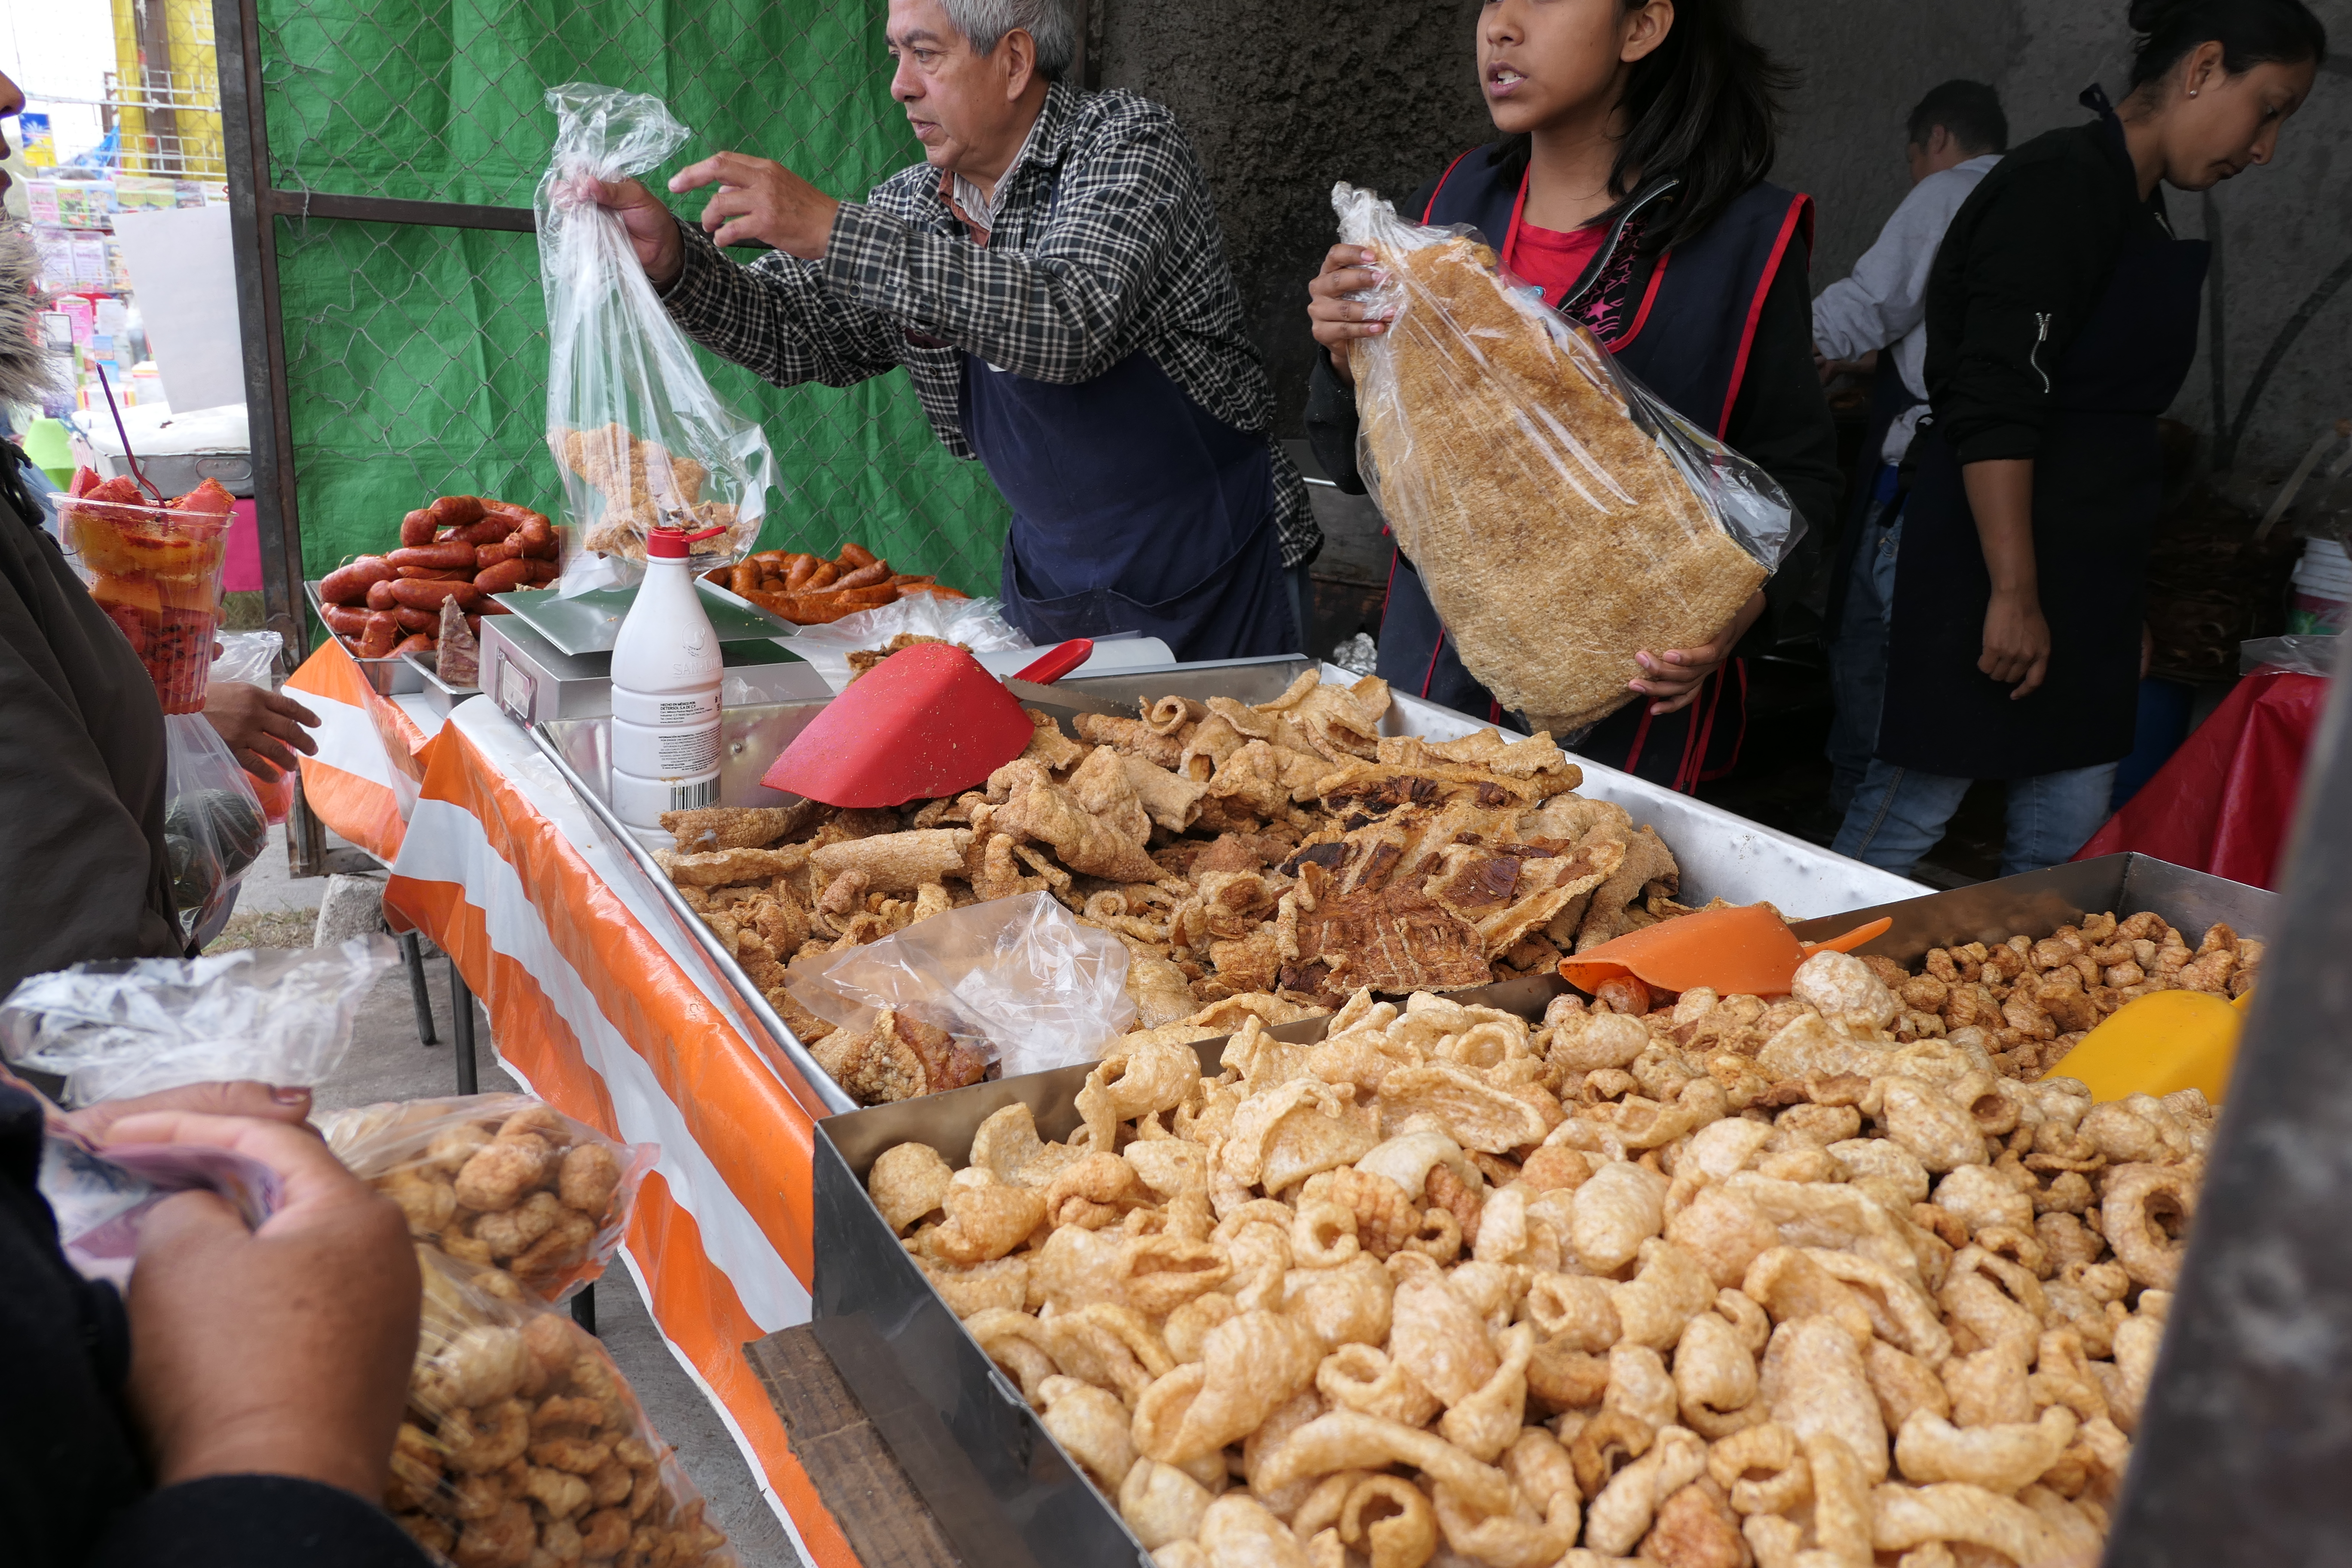 Chicharonnes or fried pig's belly is a popular snack